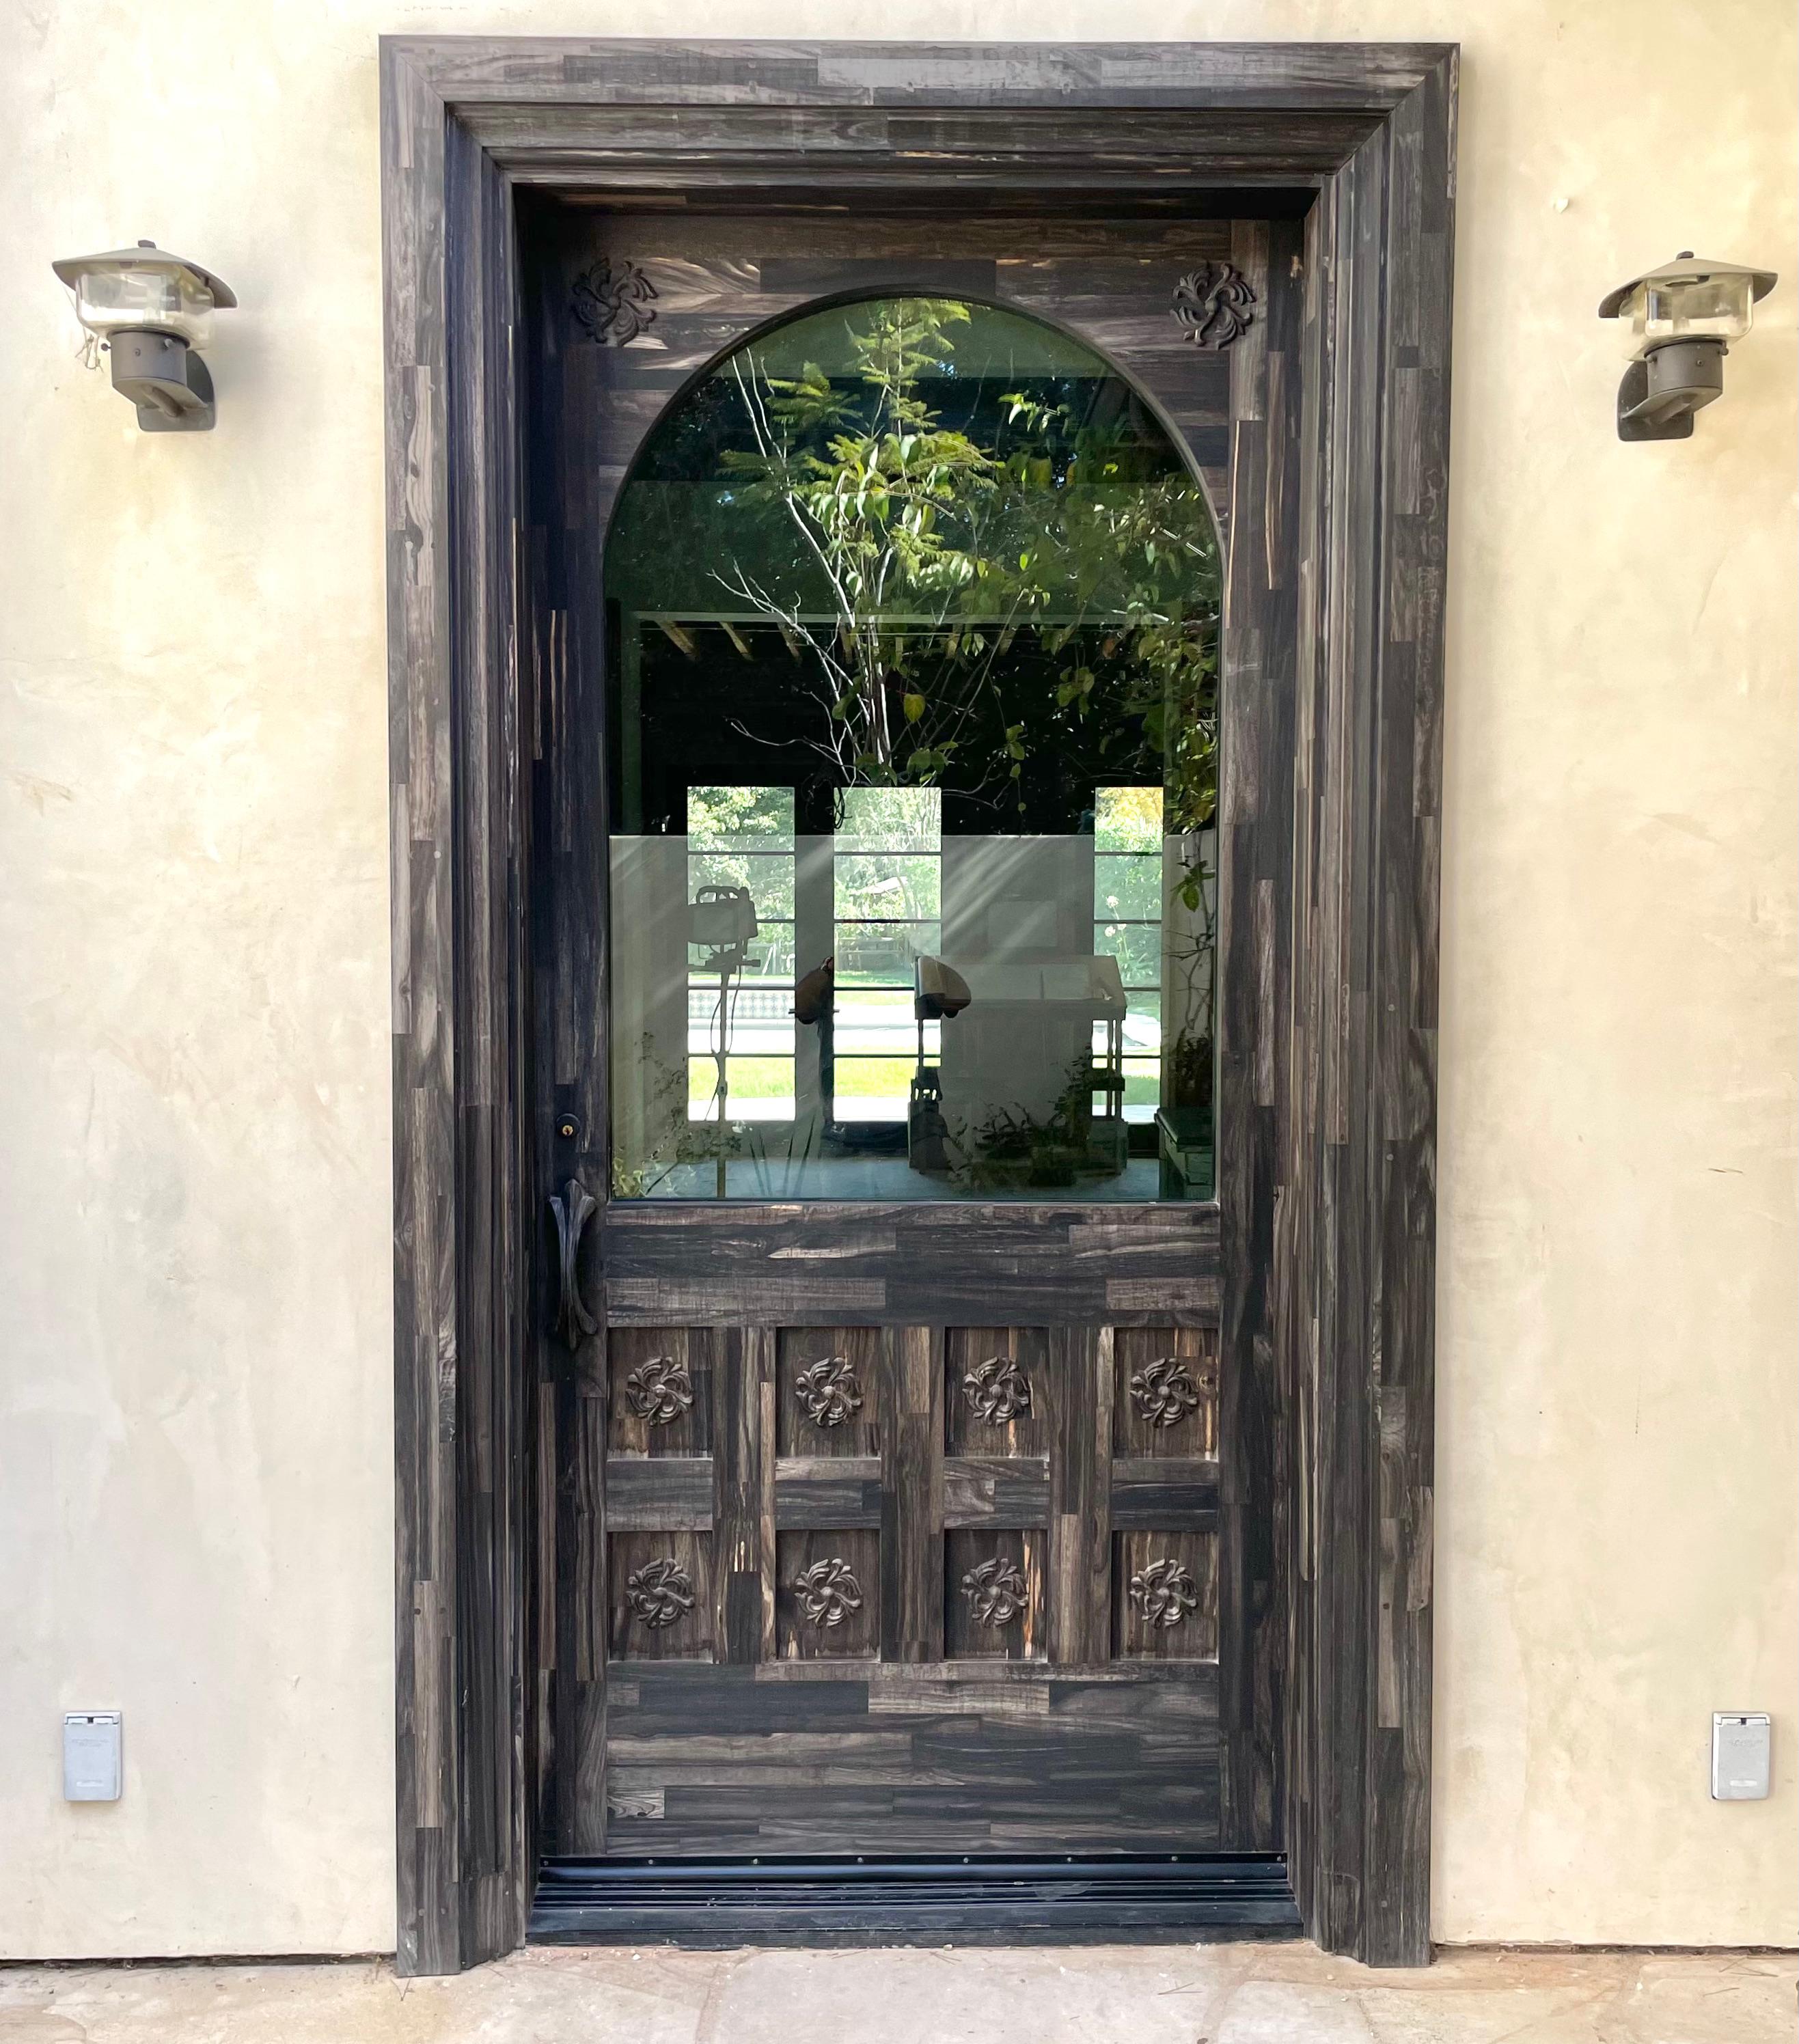 Monumental front door made by Chrome Hearts Los Angeles, for a Malibu home. Massive presence. One of one. Only door known to exist. Made custom by the owners of Chrome Hearts for the home owner. Solid silver door hinges with ornate crowns and Chrome